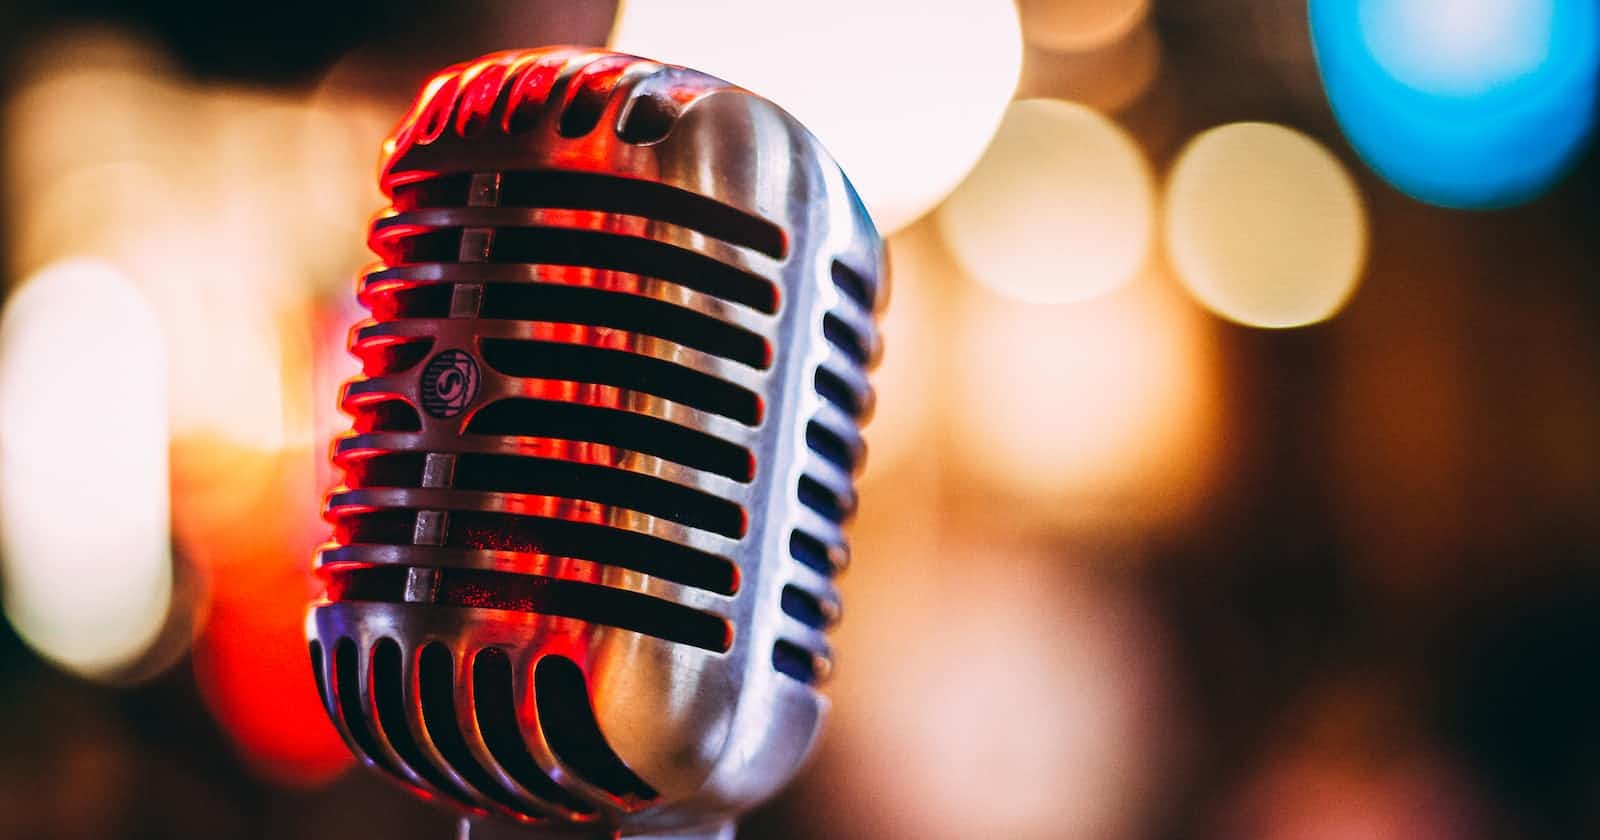 Build an Auto Karaoke System with React and Vercel